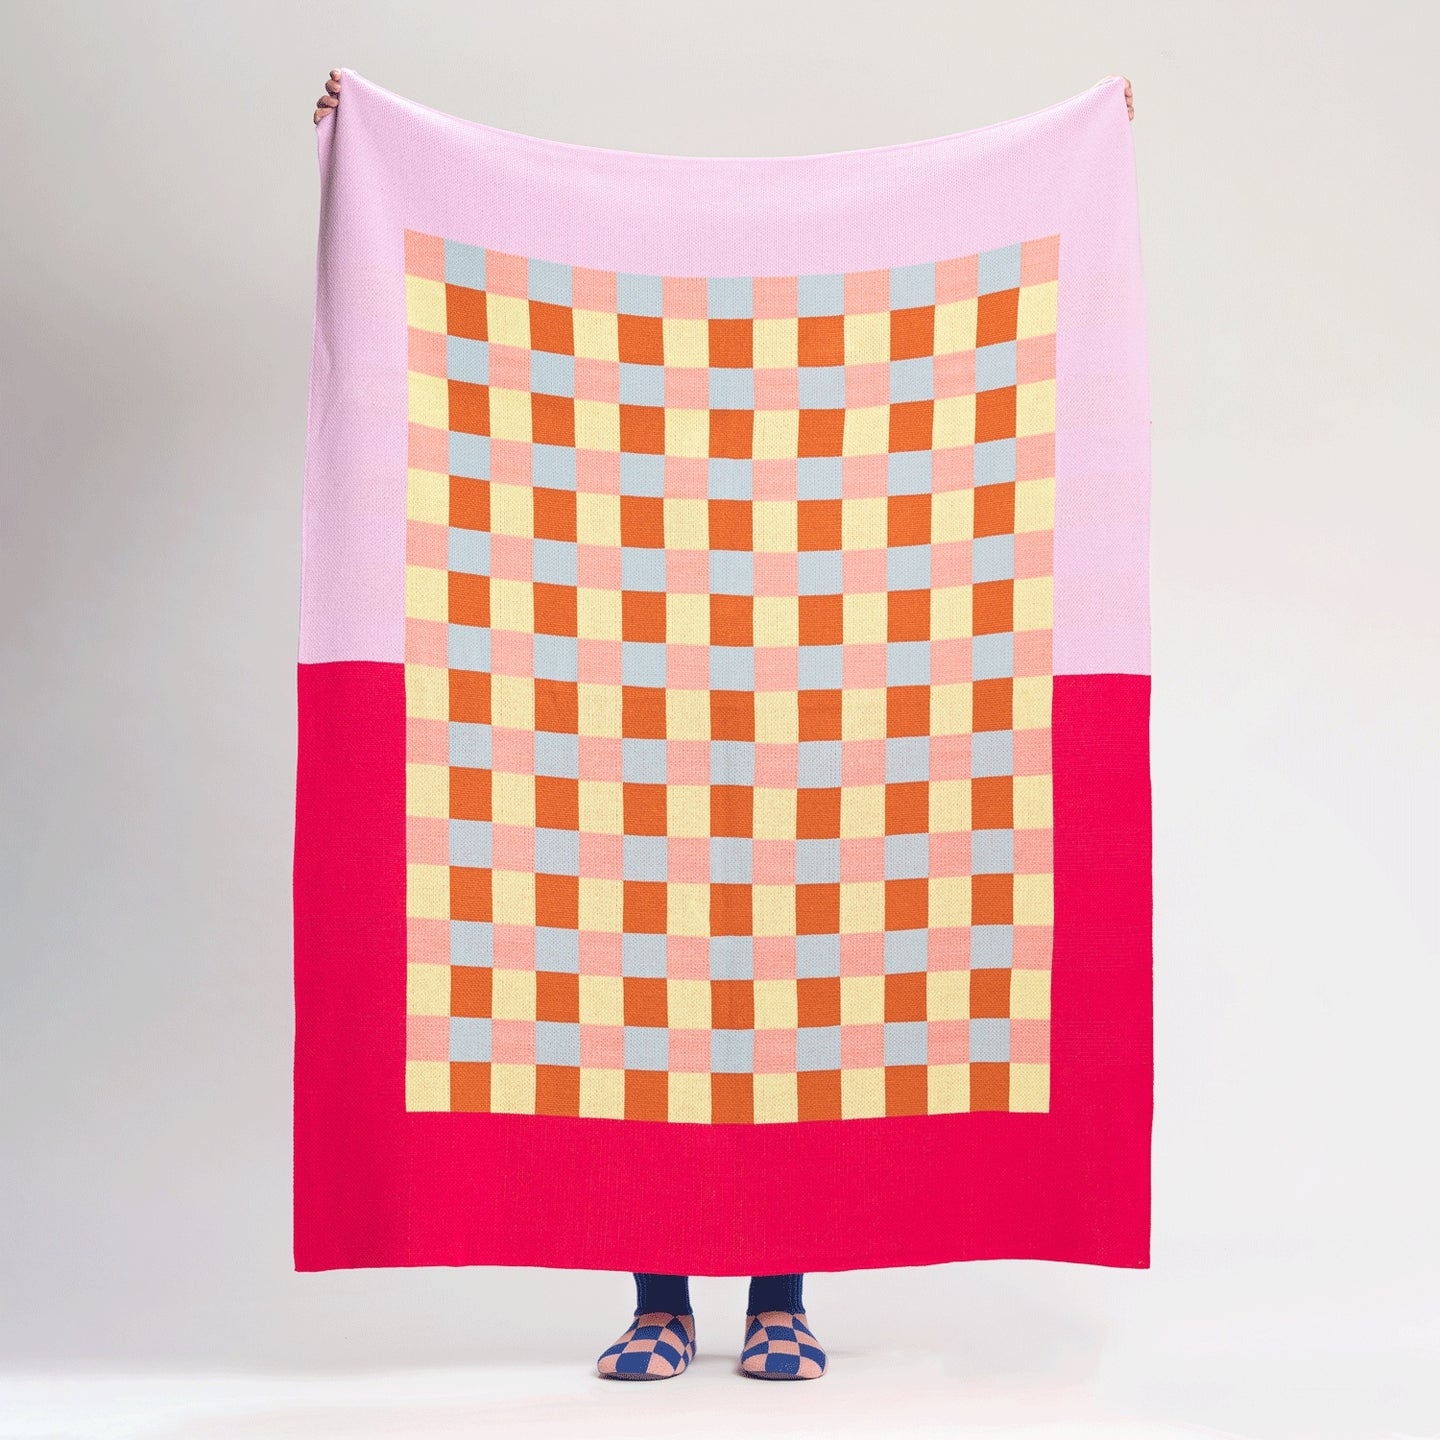 Gingham Checkerboard Throw